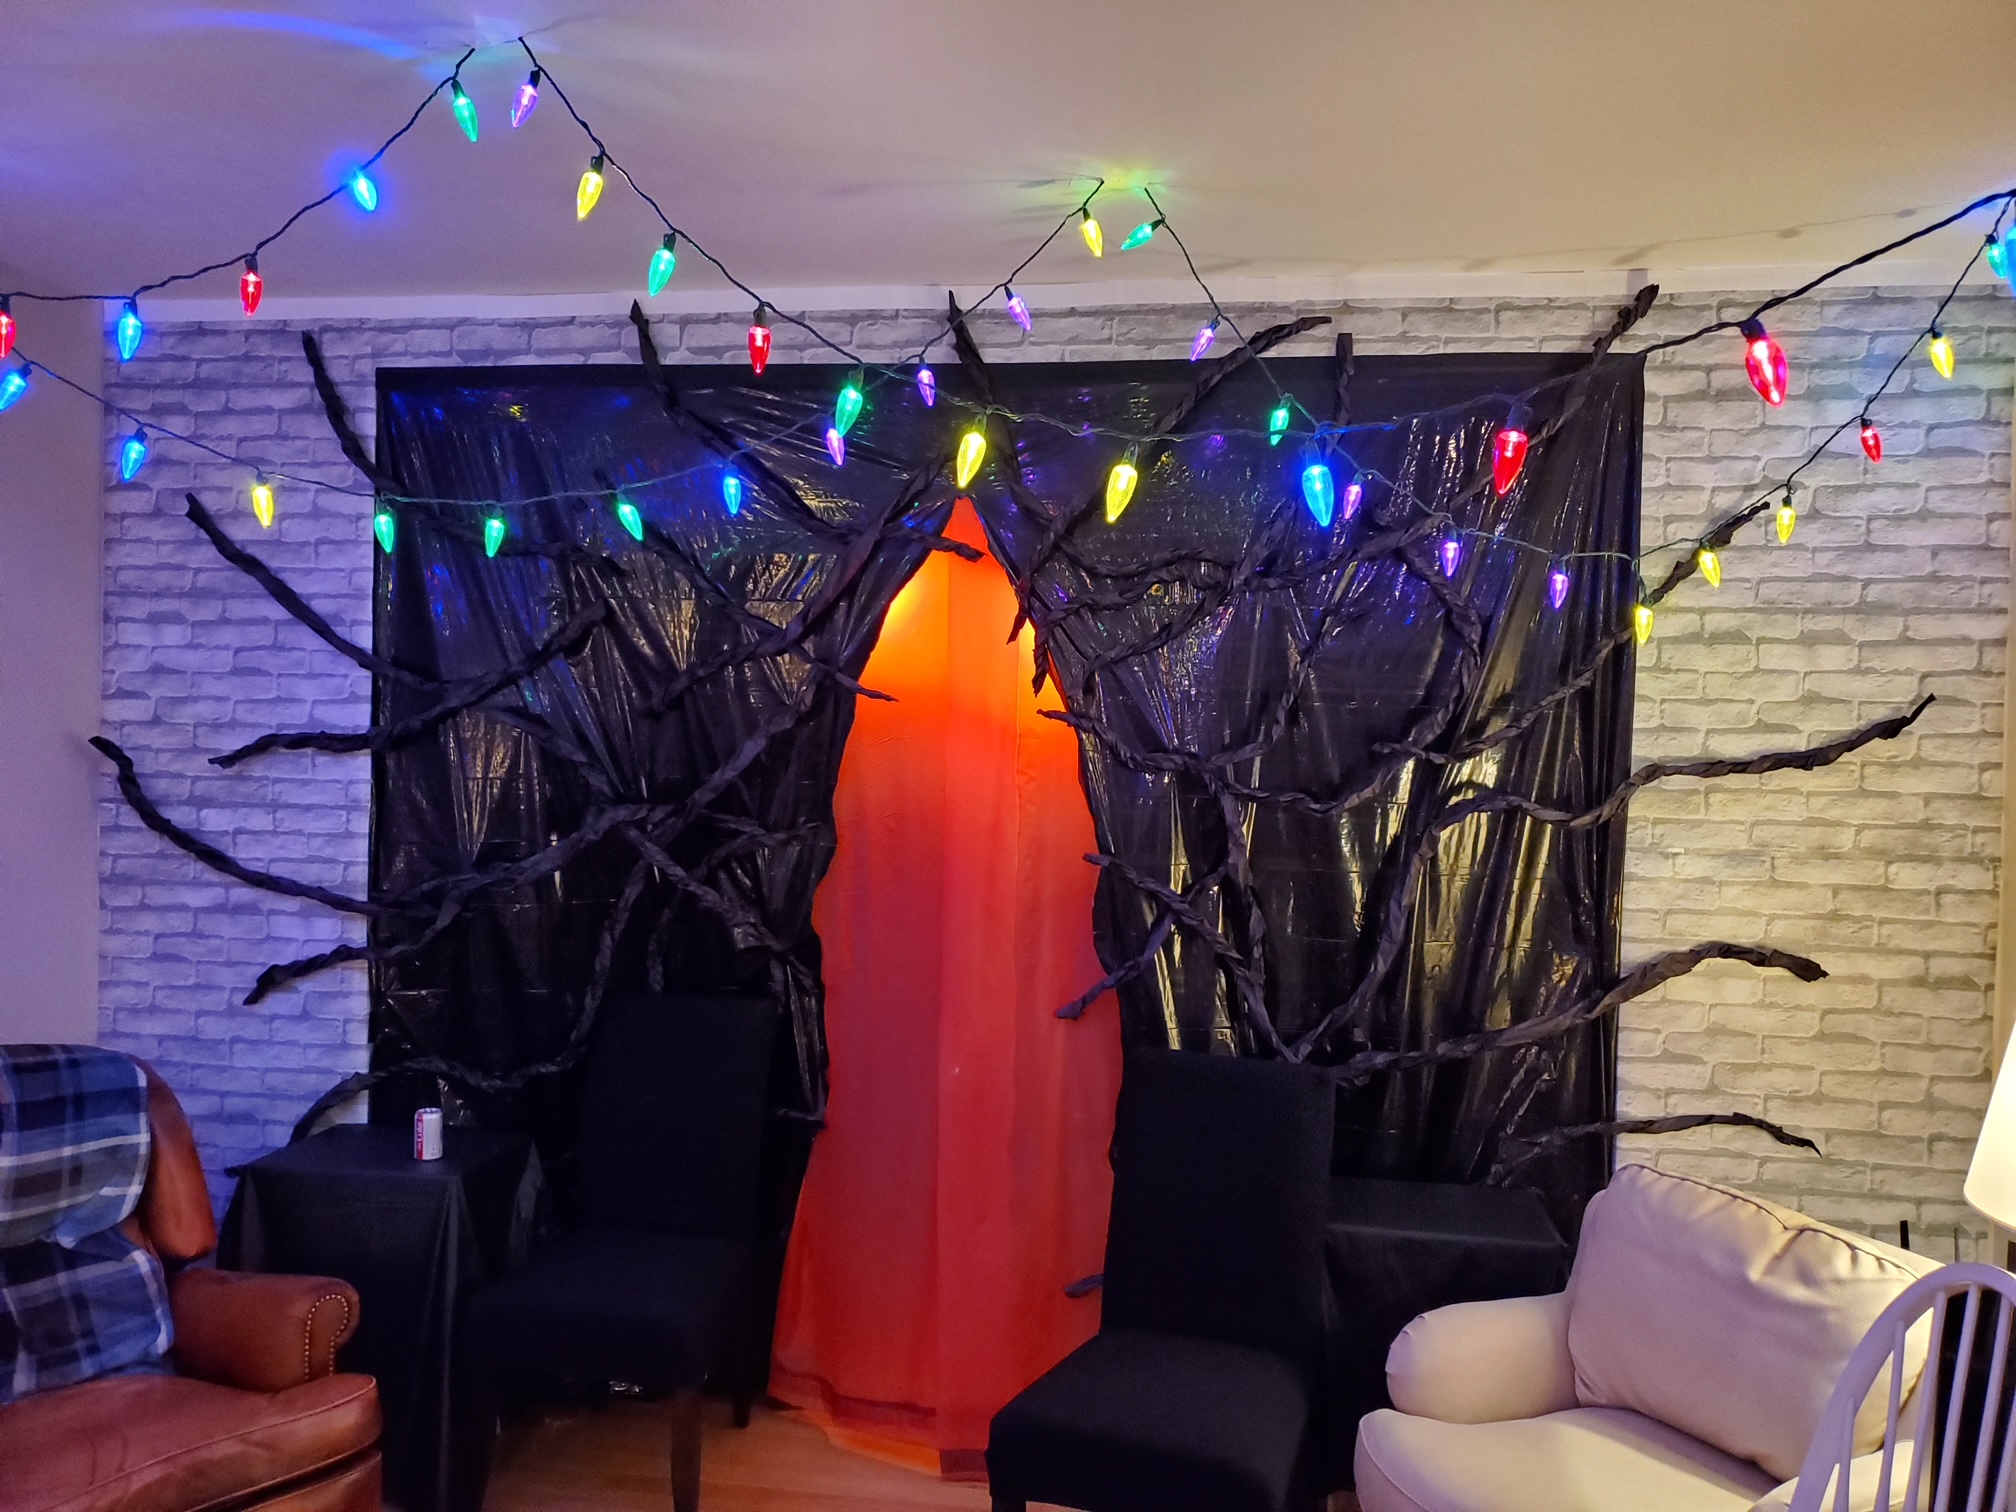 These “Stranger Things” Fans Transformed Their Home Into Scenes From the  Show - Washingtonian